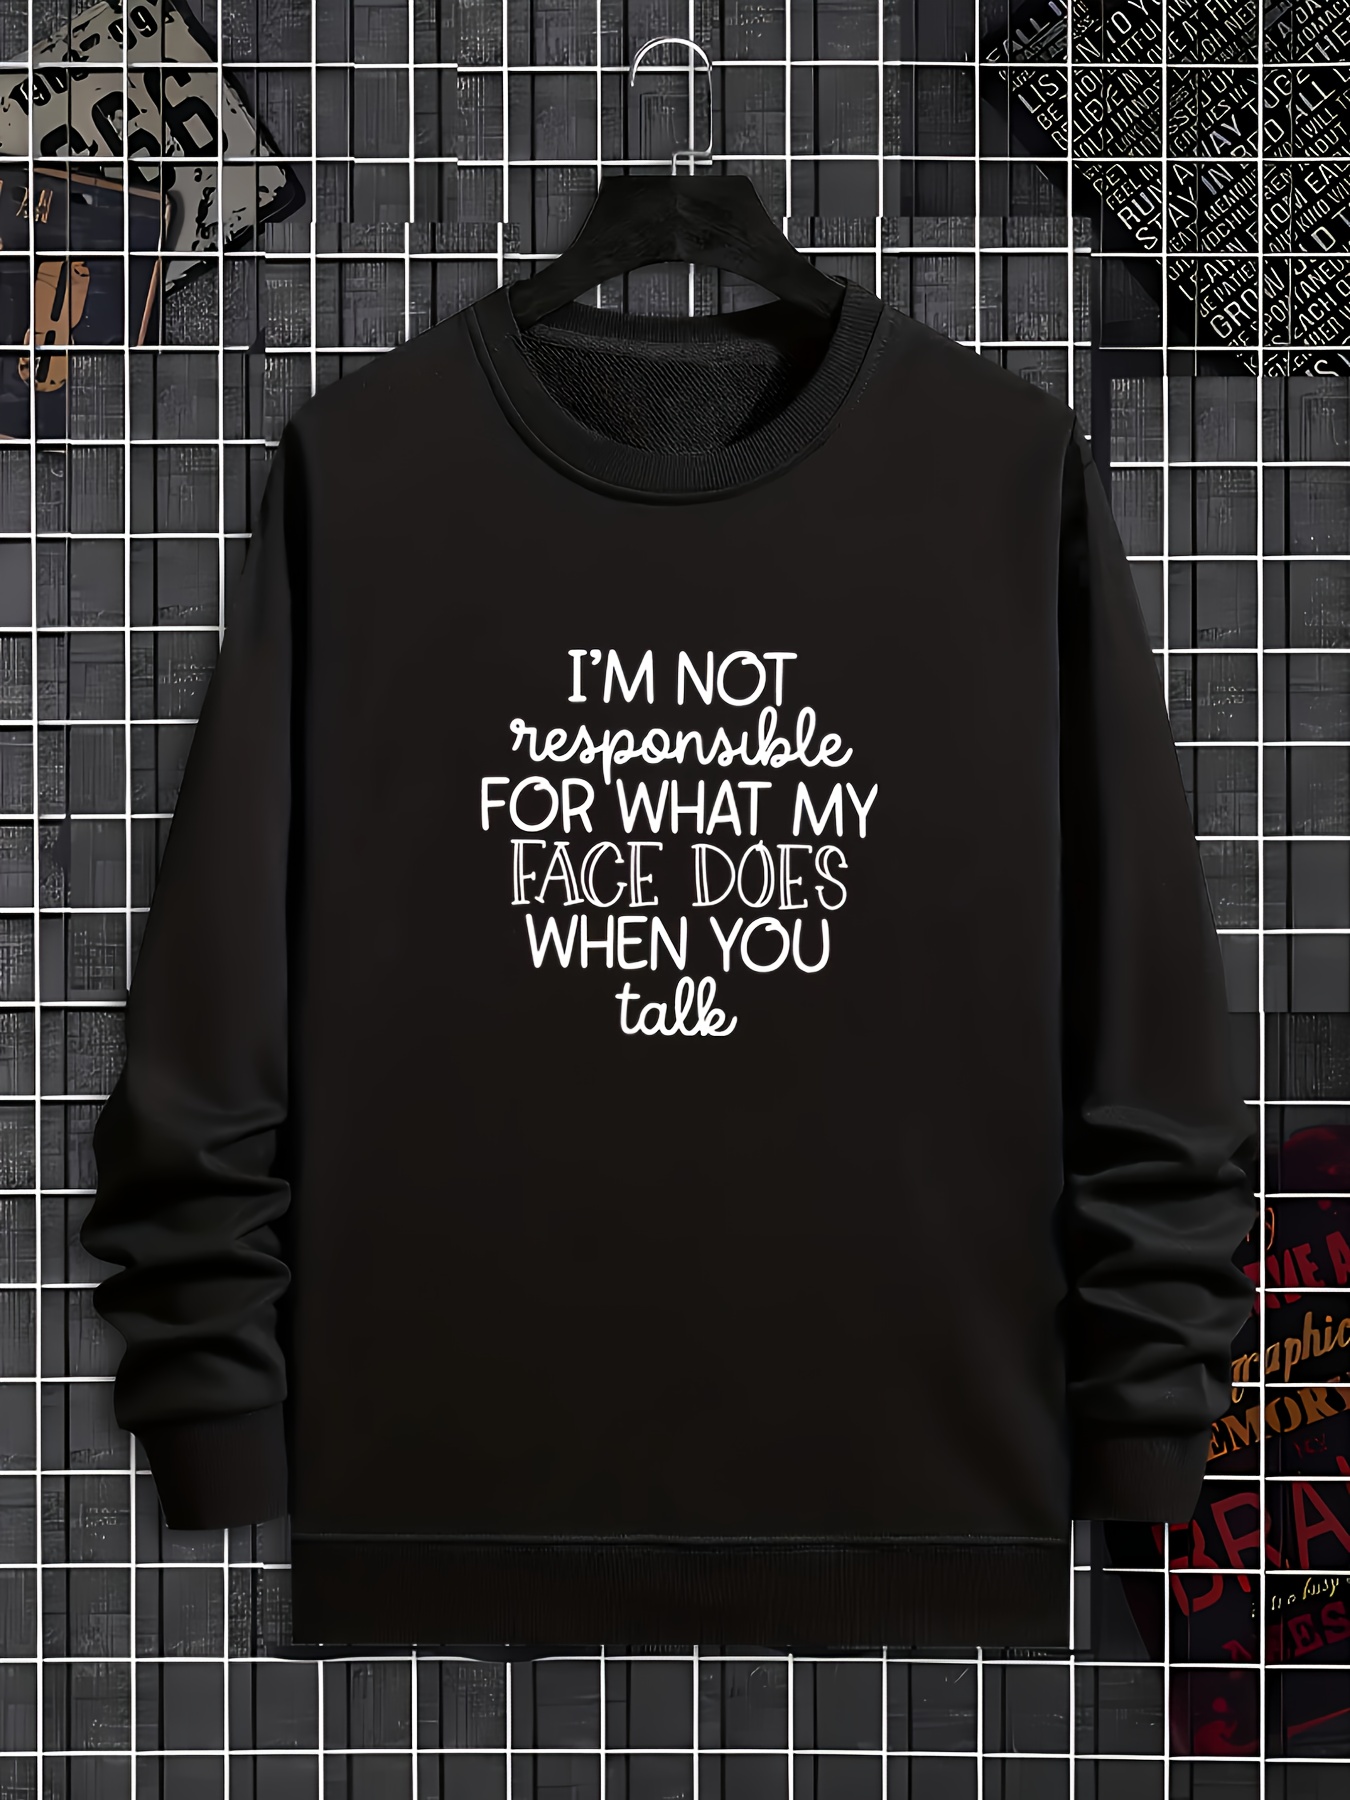 I Am Not Responsible For What My Face Does Men's Sweatshirts